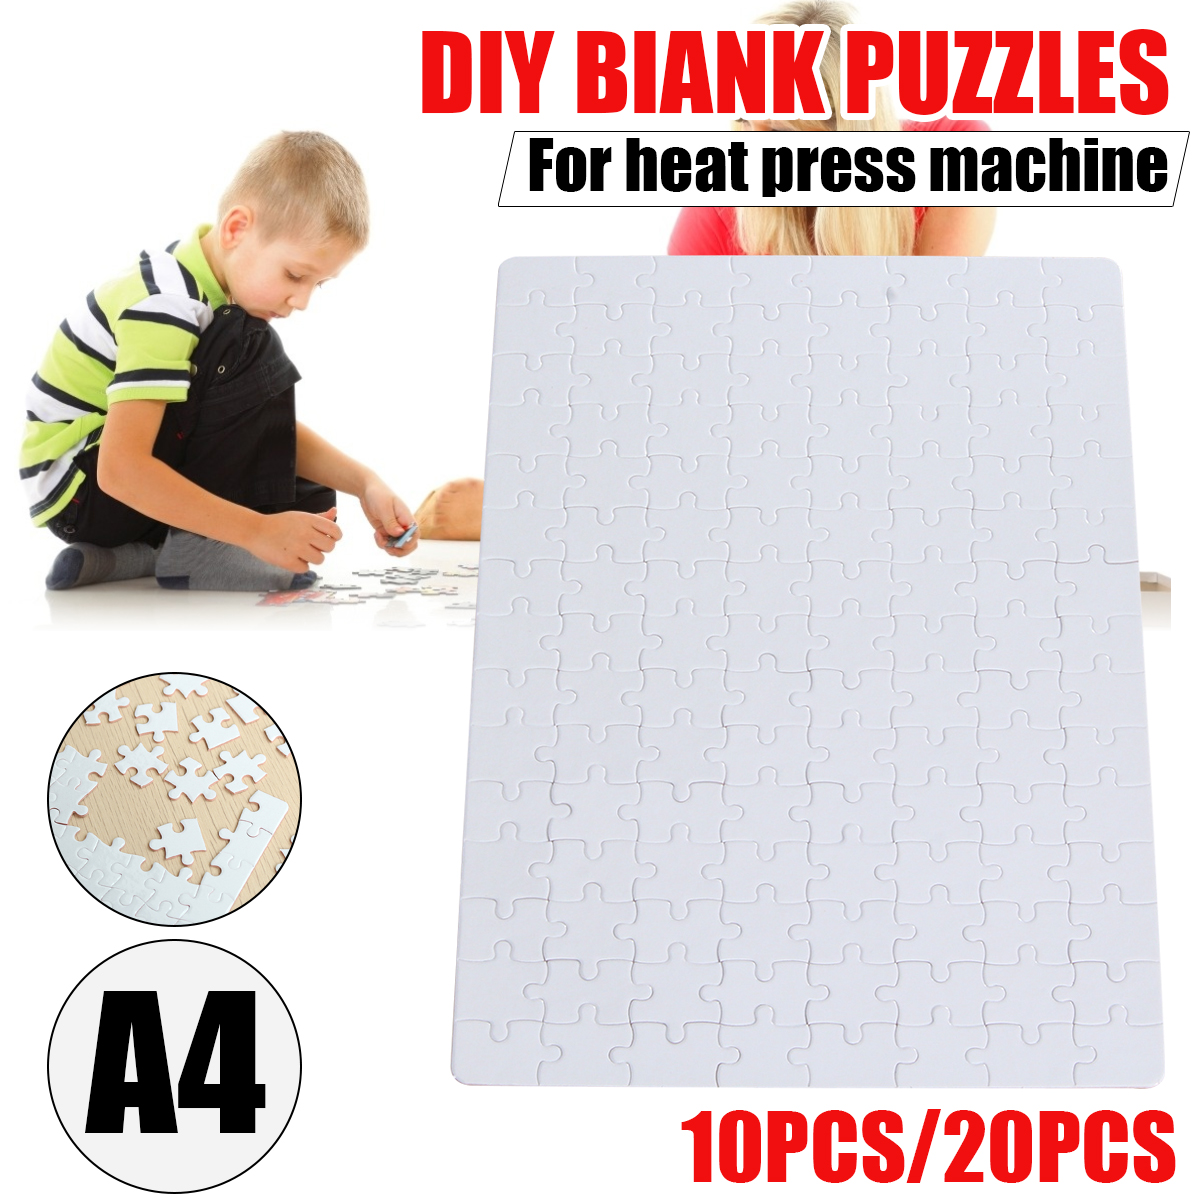 1pc/10pcs/20pcs A4DIY Blank Puzzle Blank Jigsaw Puzzle Dye Sublimation Printable For Heat Press Machine - image 1 of 8